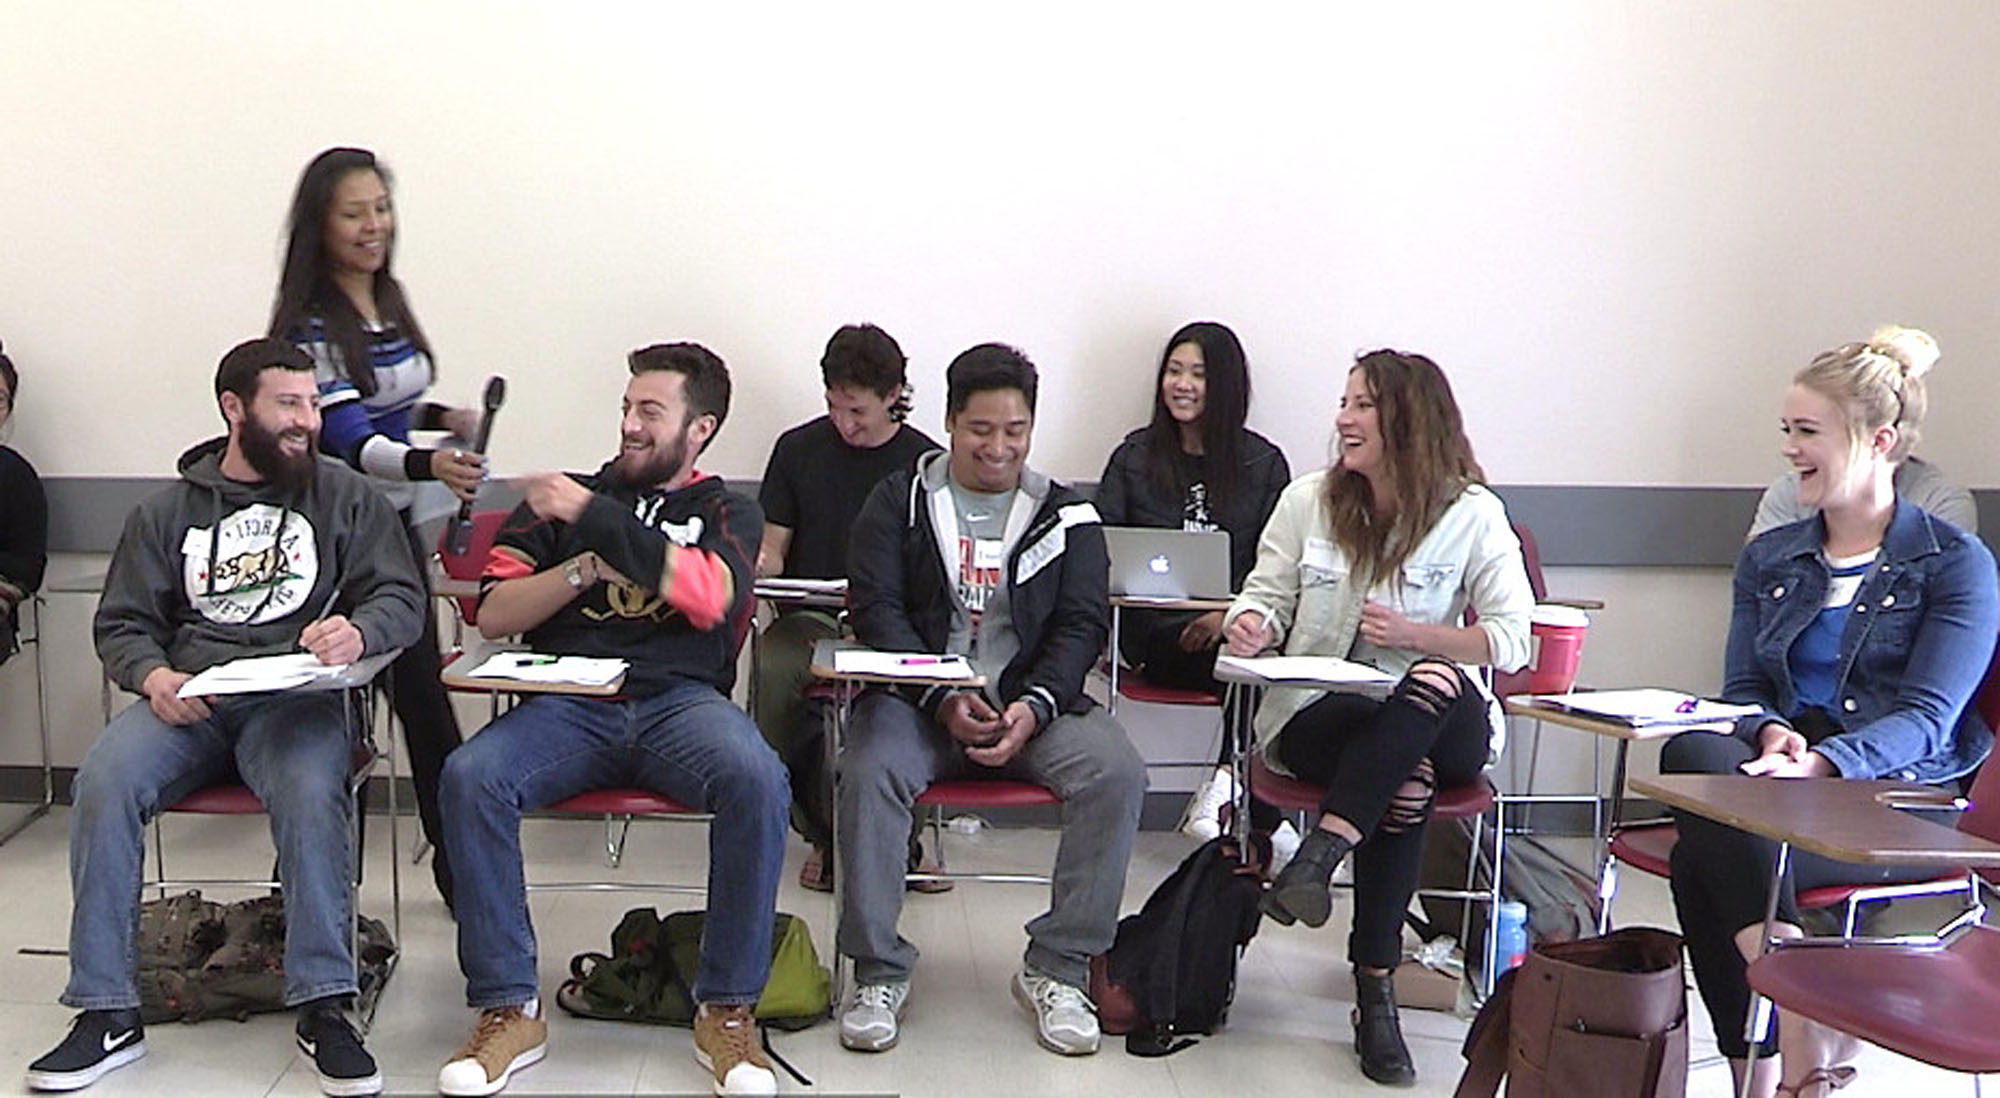 A group of smiling and laughing people in a classroom handing a microphone to each other to speak